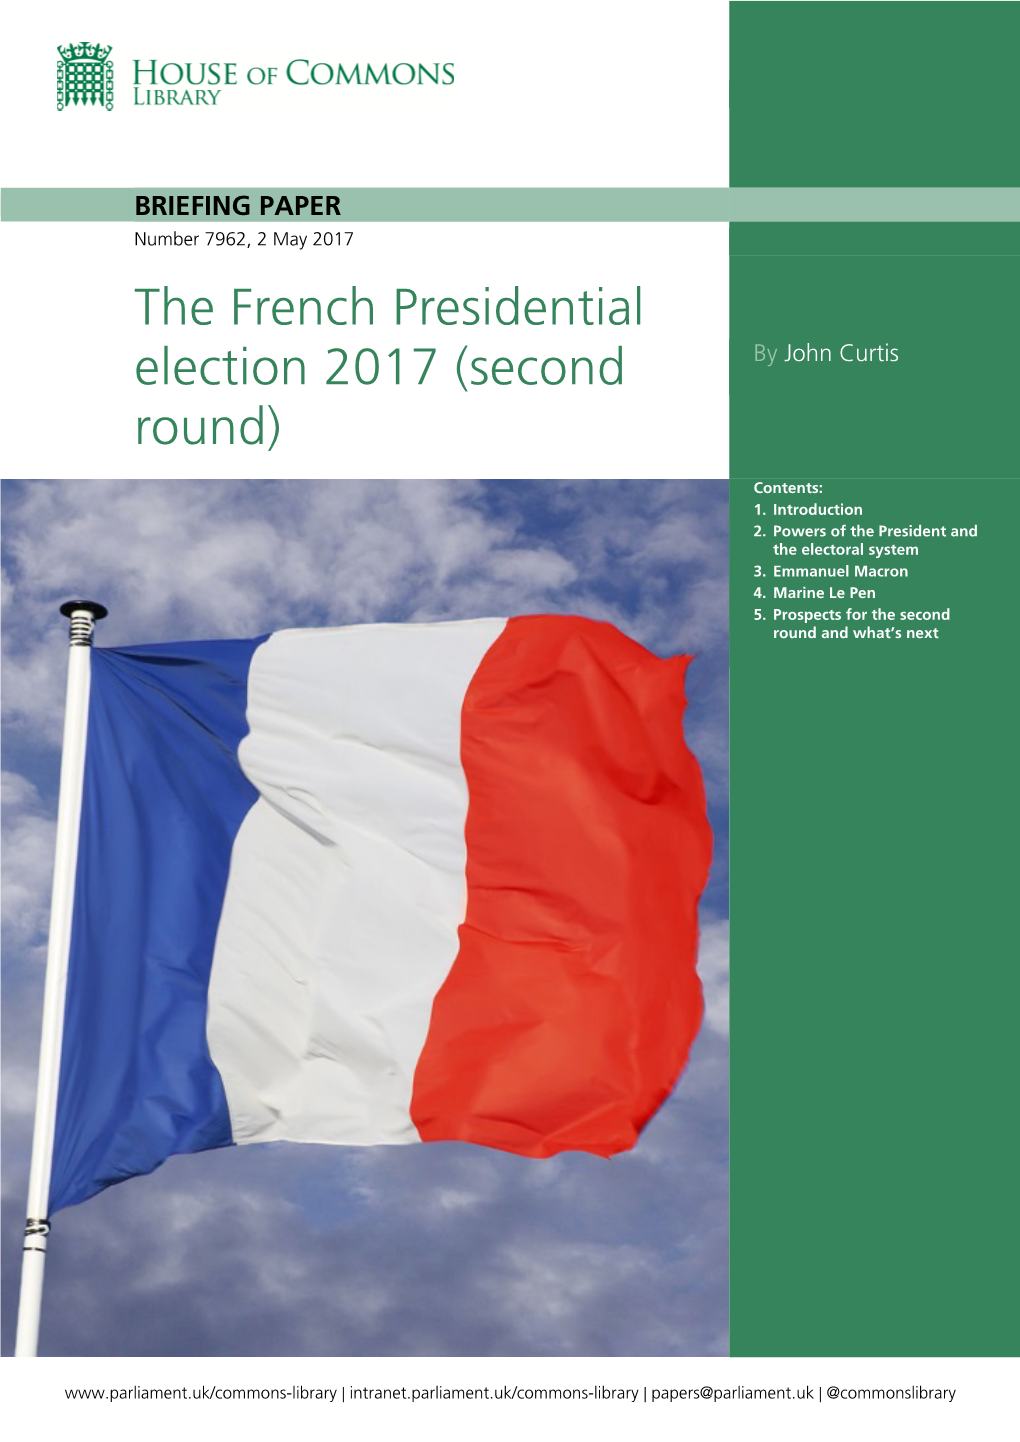 The French Presidential Election 2017 (Second Round)